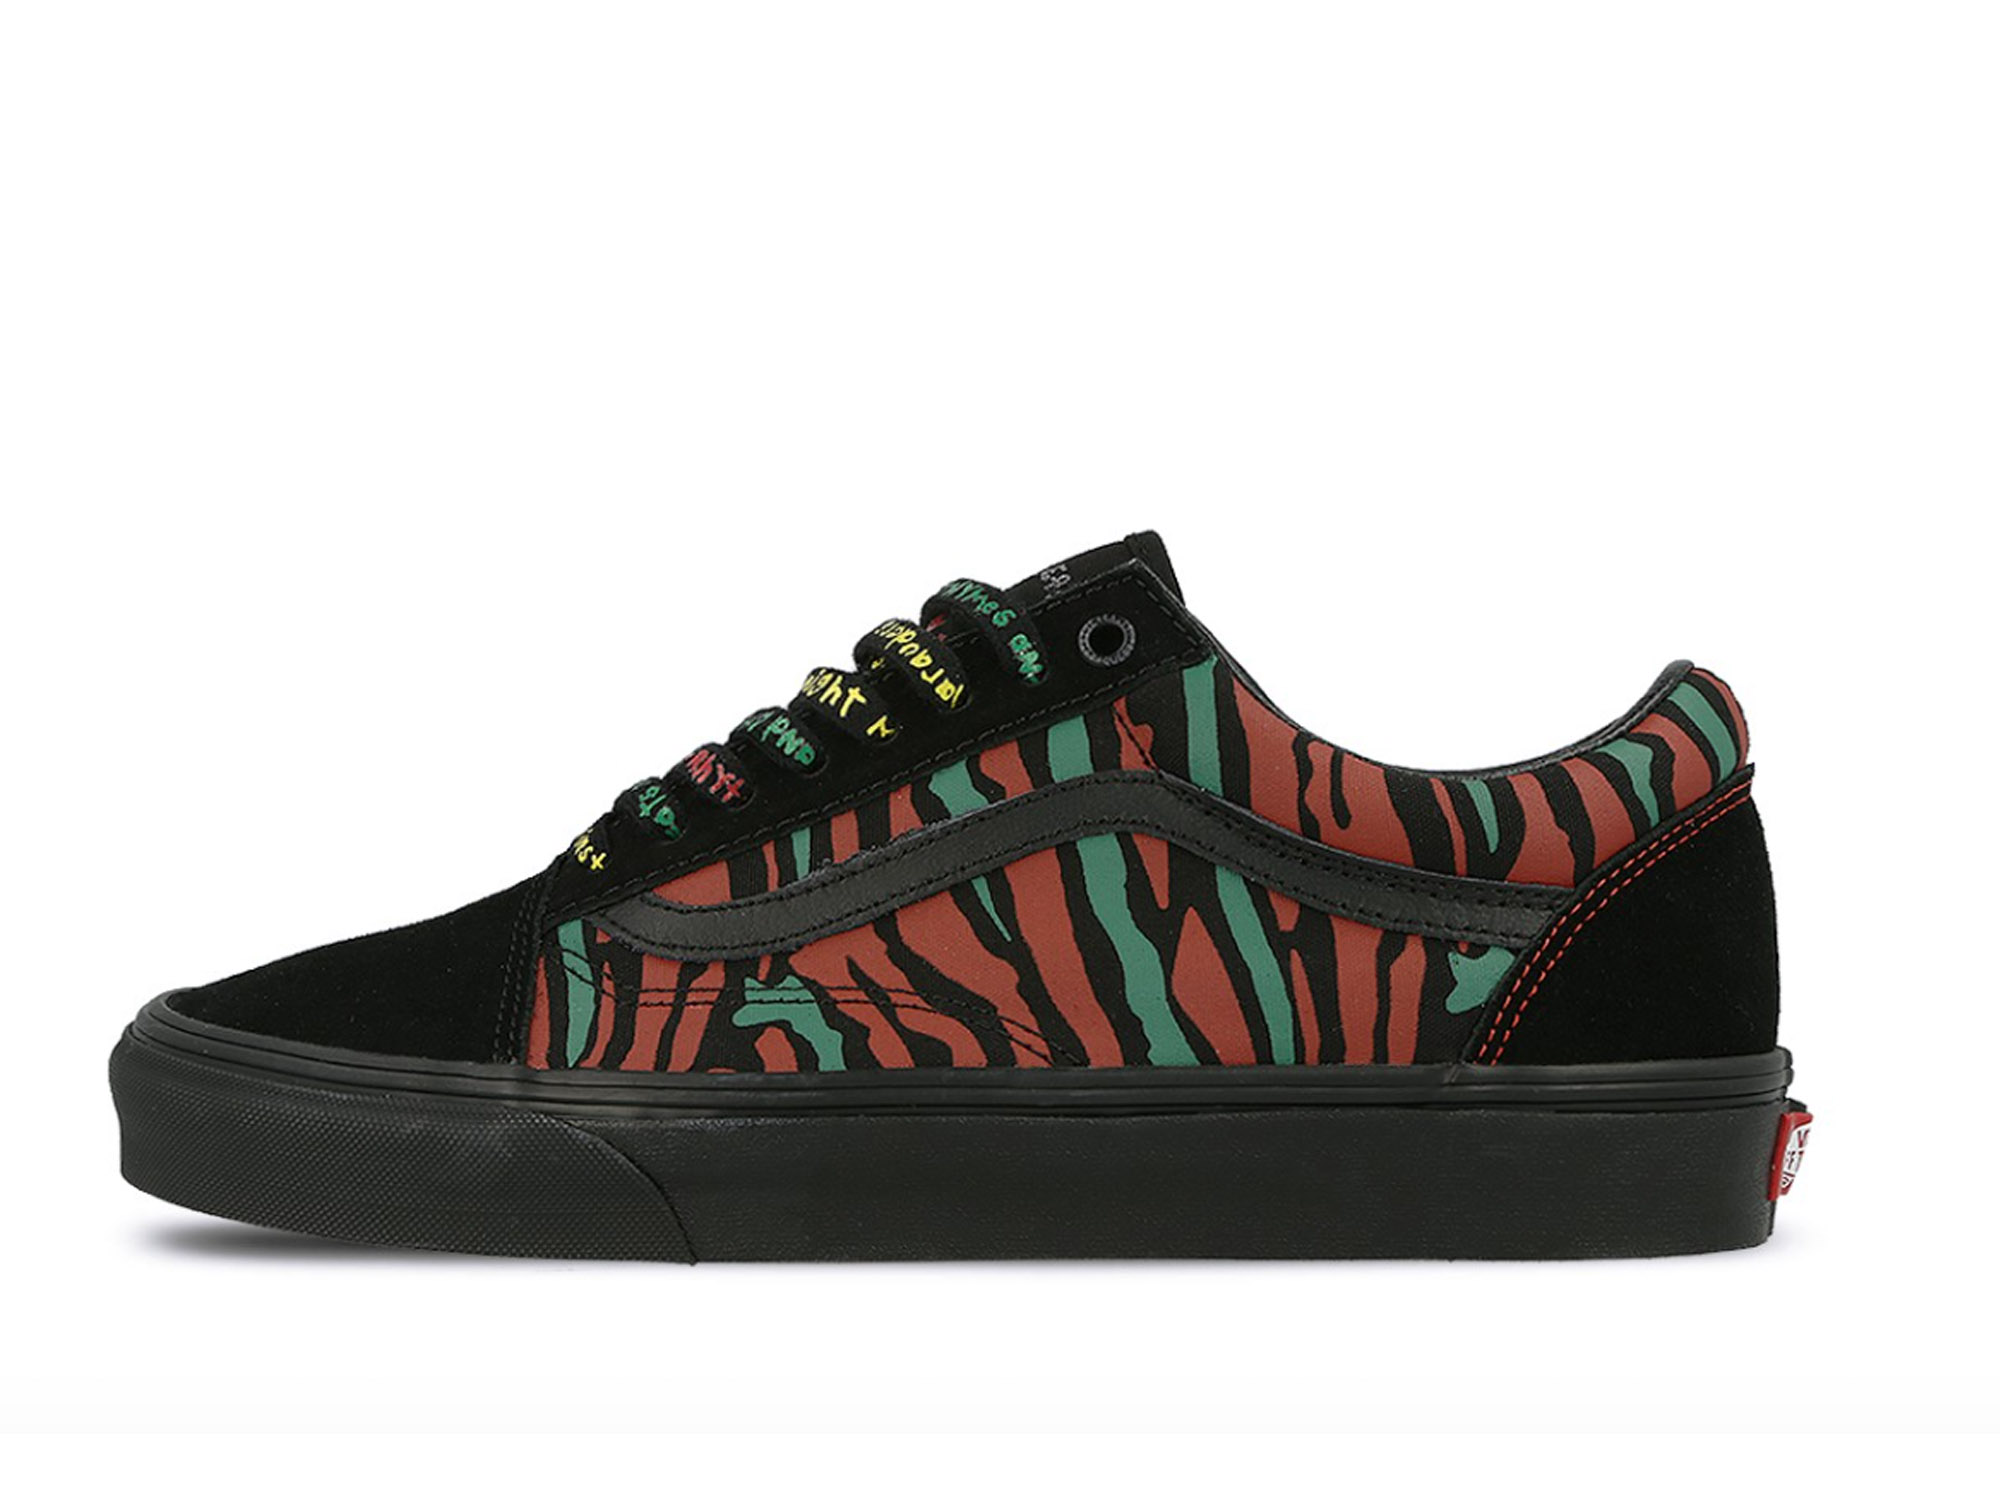 A Vans x A Tribe Called Quest Collection is Dropping This Week ...